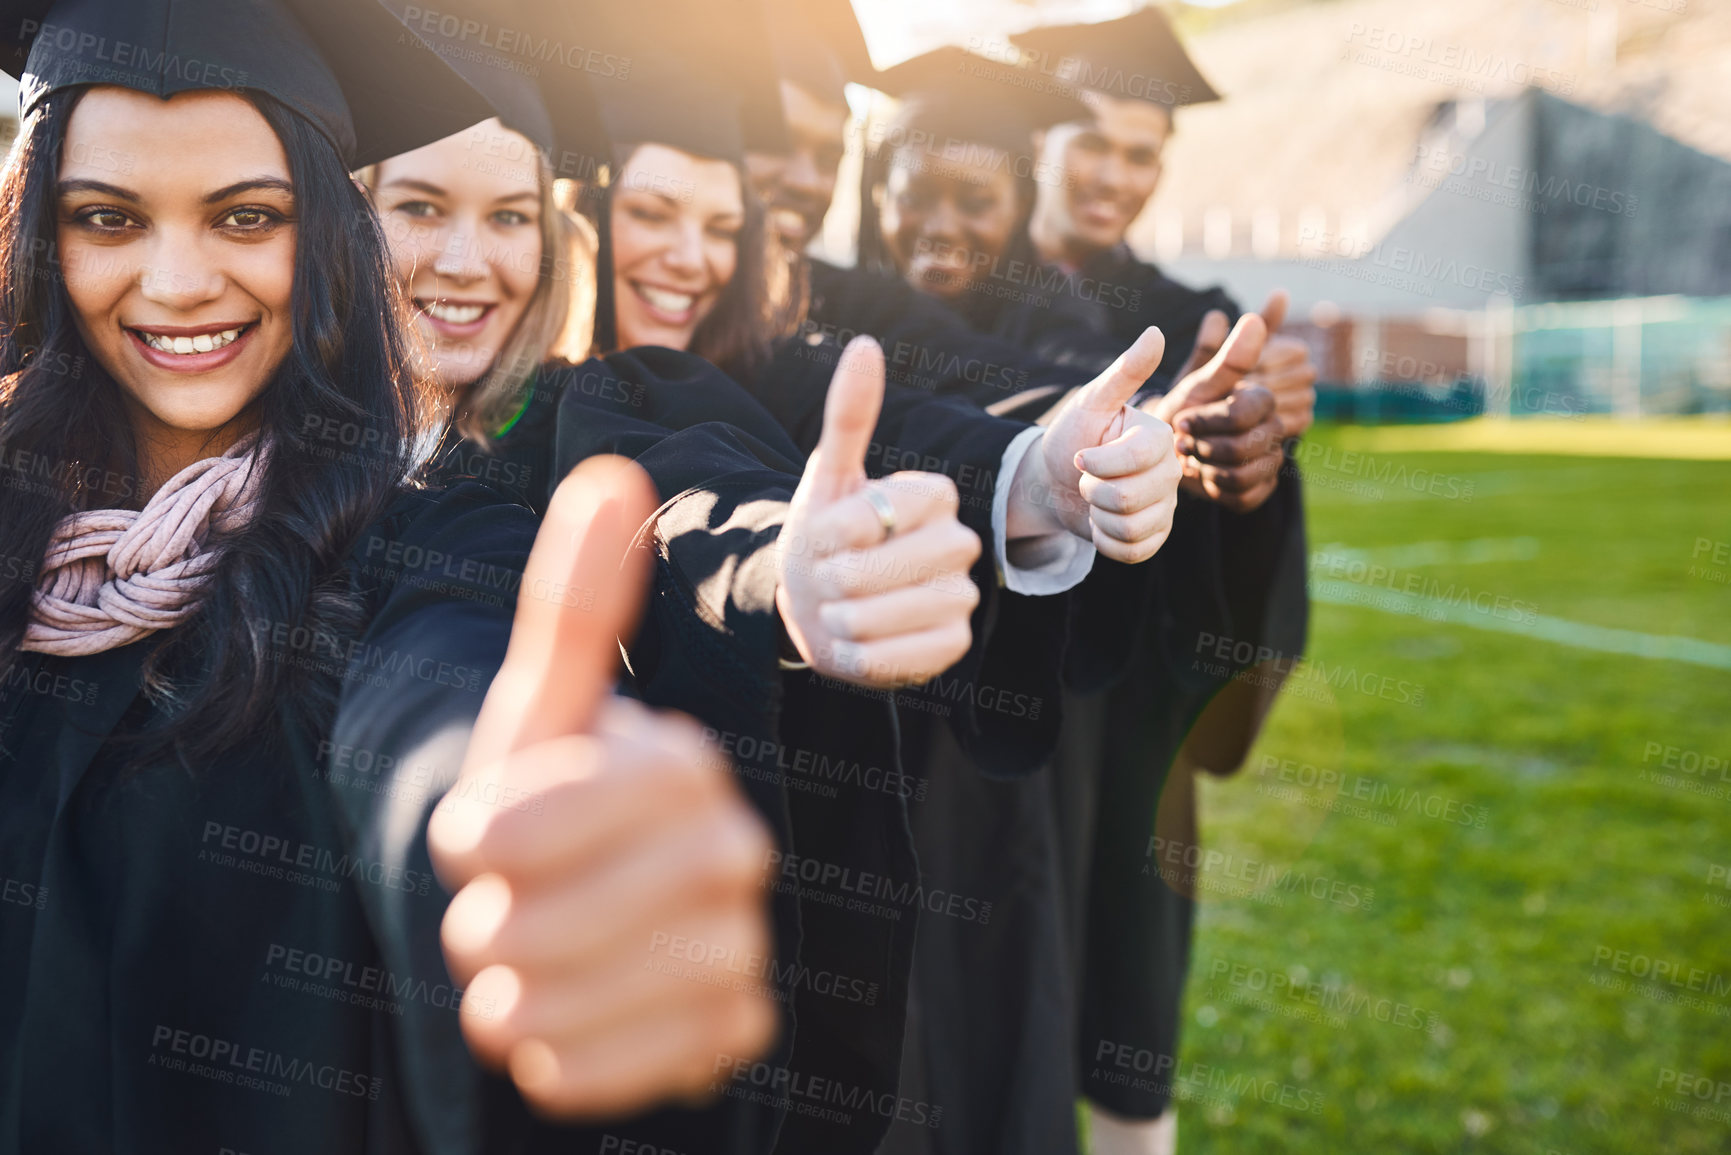 Buy stock photo Portrait of a group of students showing thumbs up on graduation day